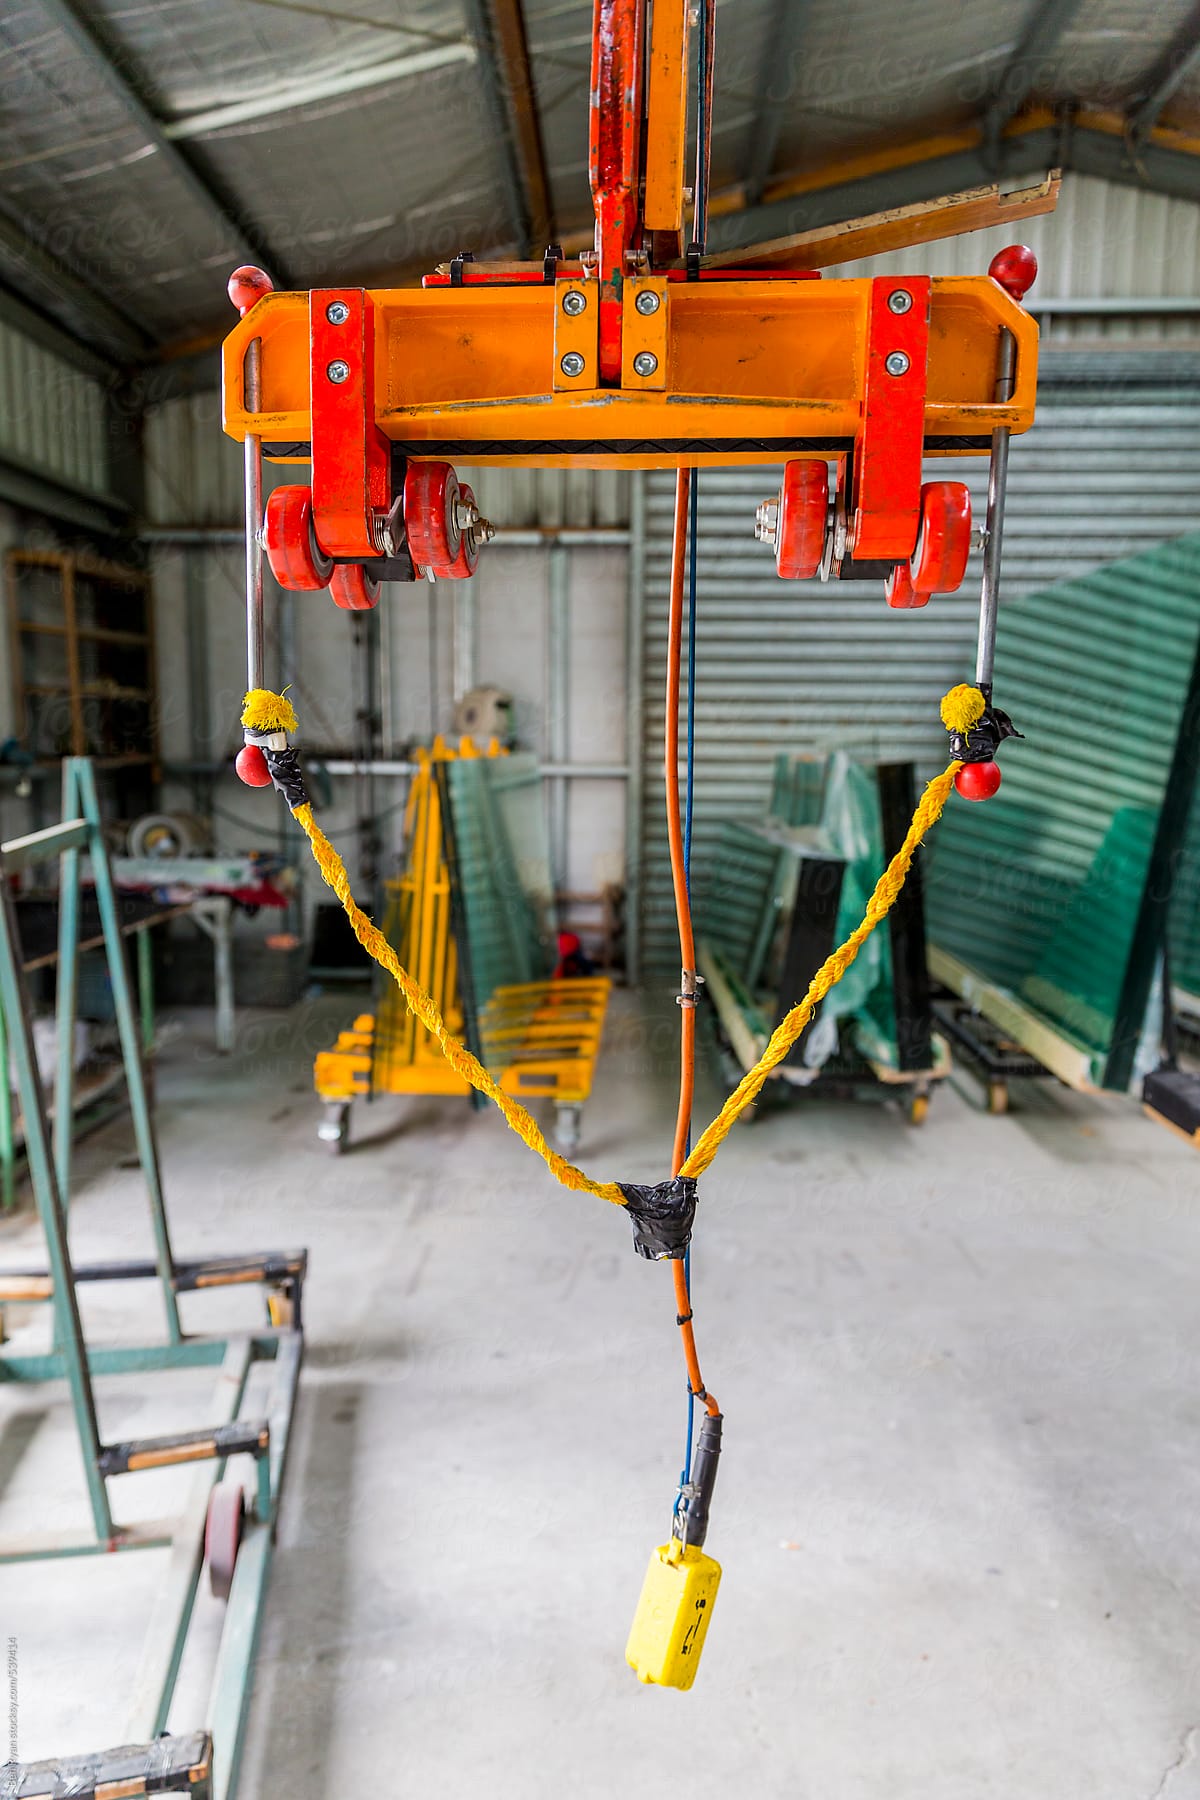 Specialised crane for loading glass panels to a cutting bed